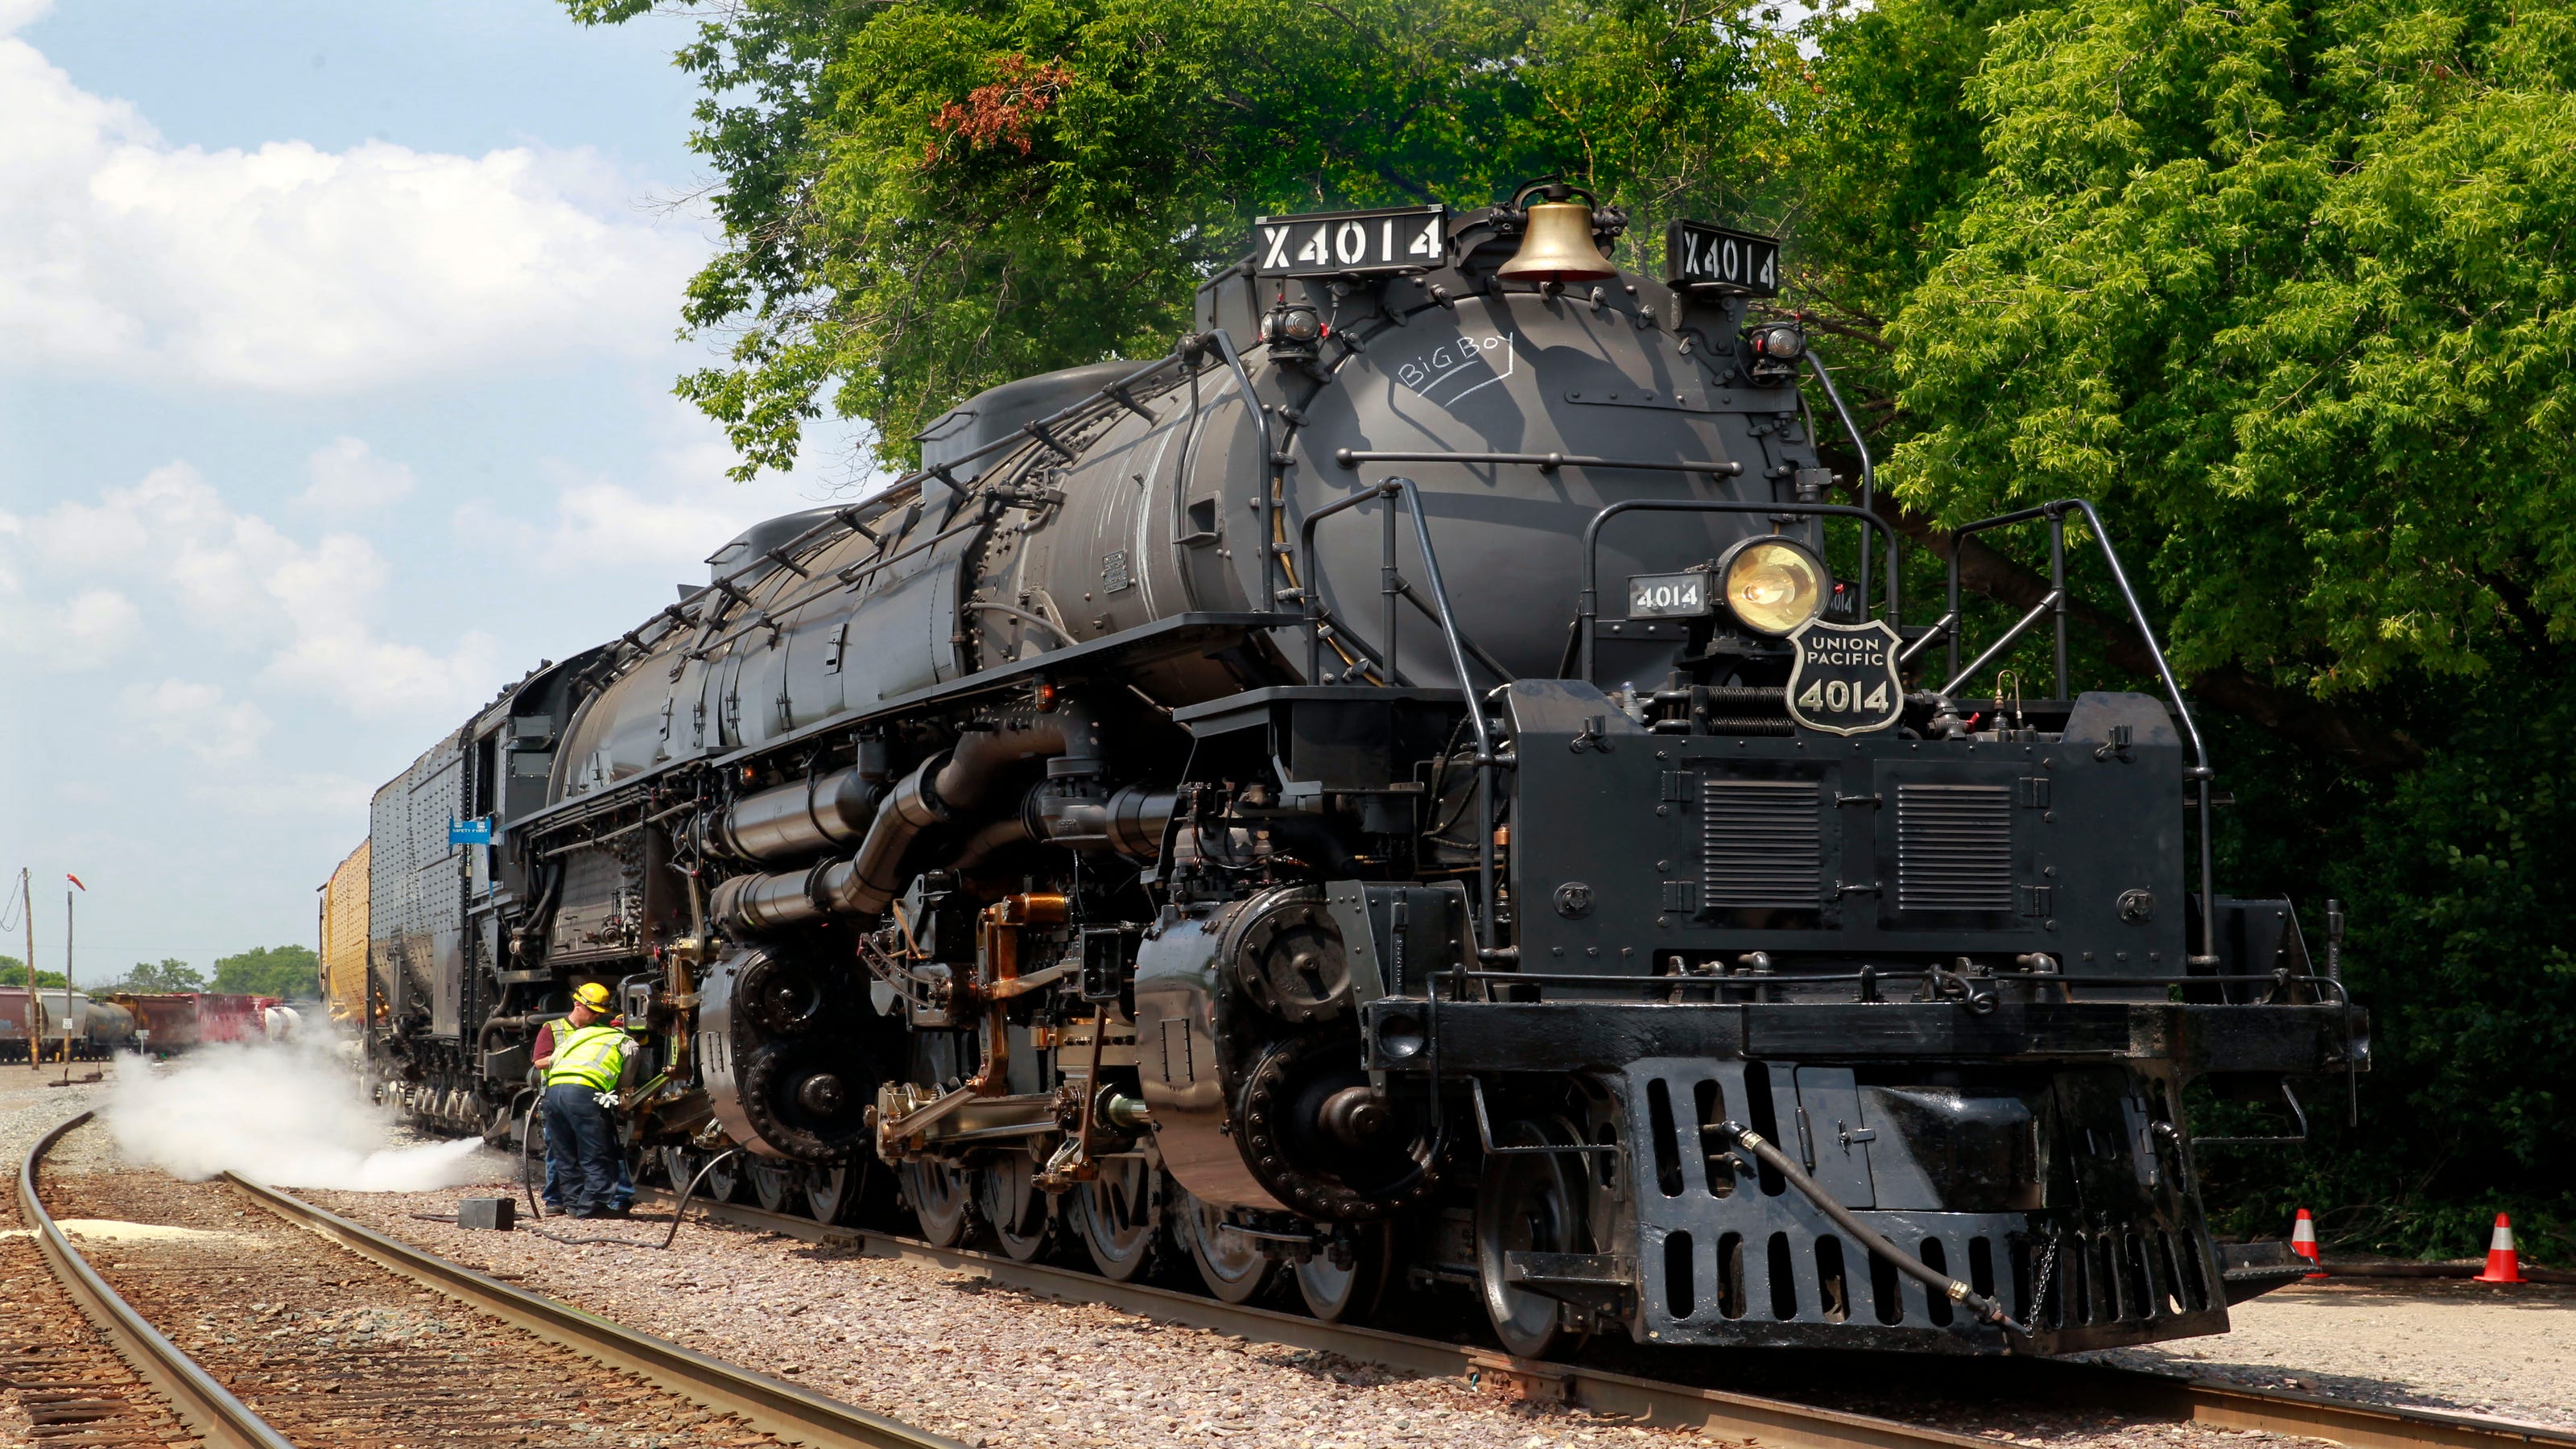 Big Boy No. 4014 arrives in Butler and fans of the worlds largest steam